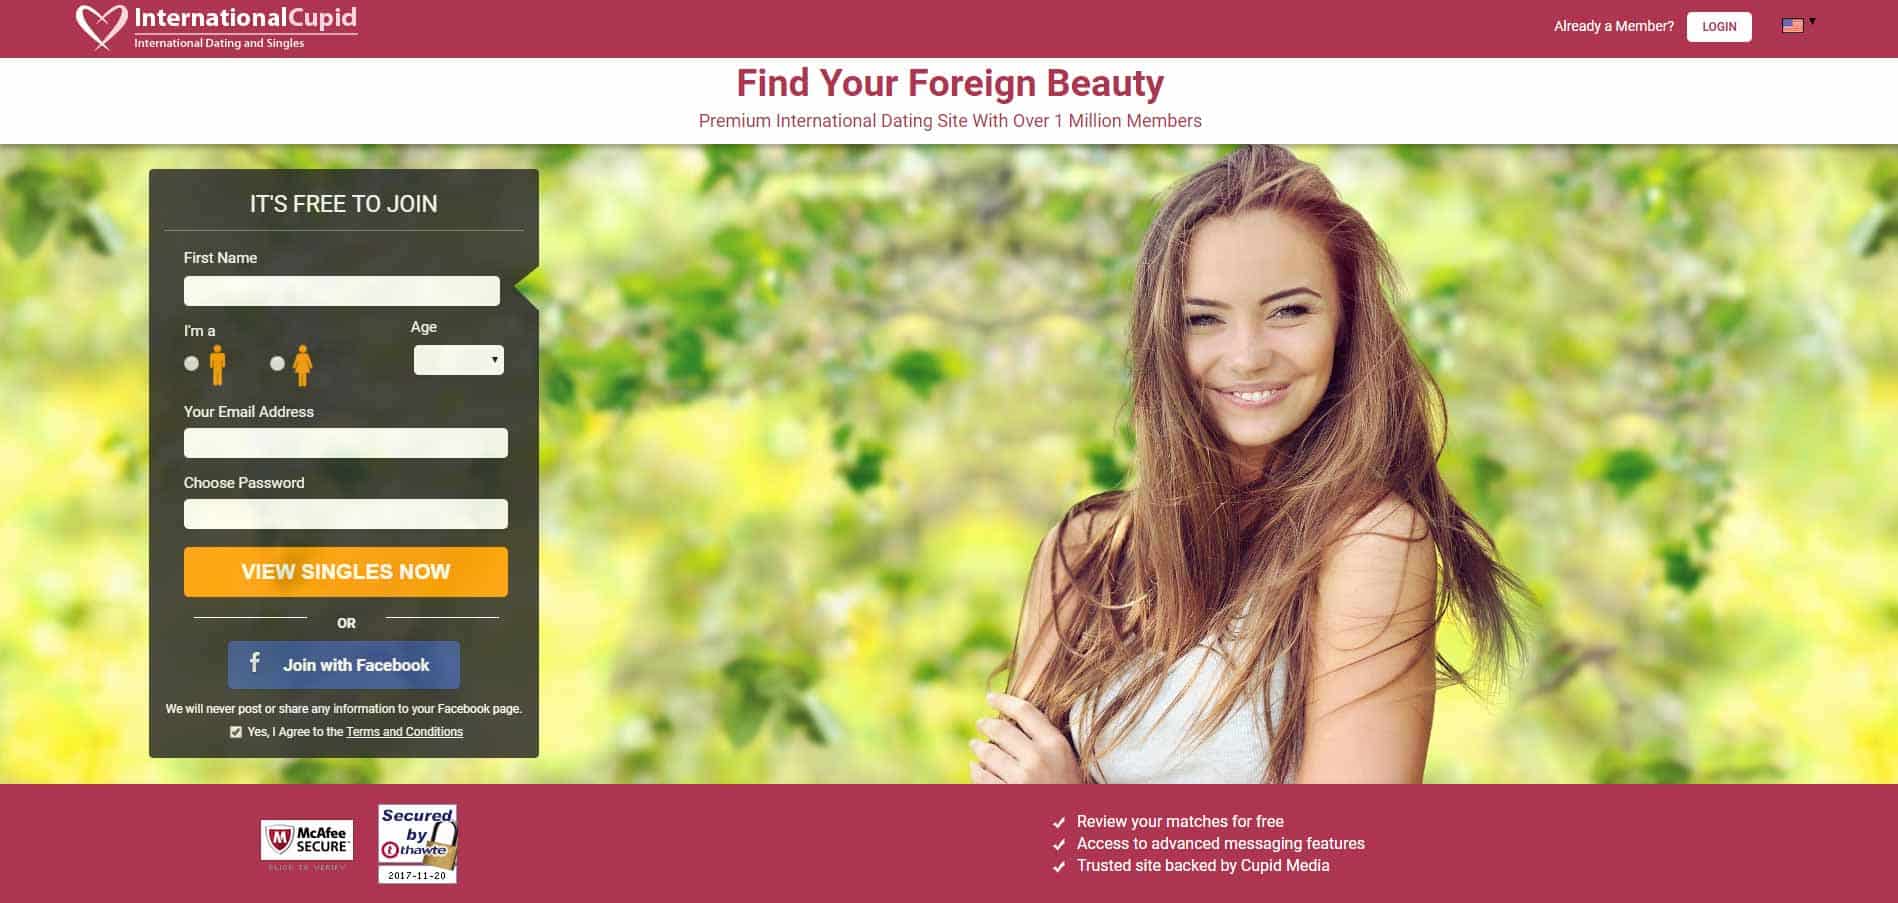 International Cupid home page image for international dating site review